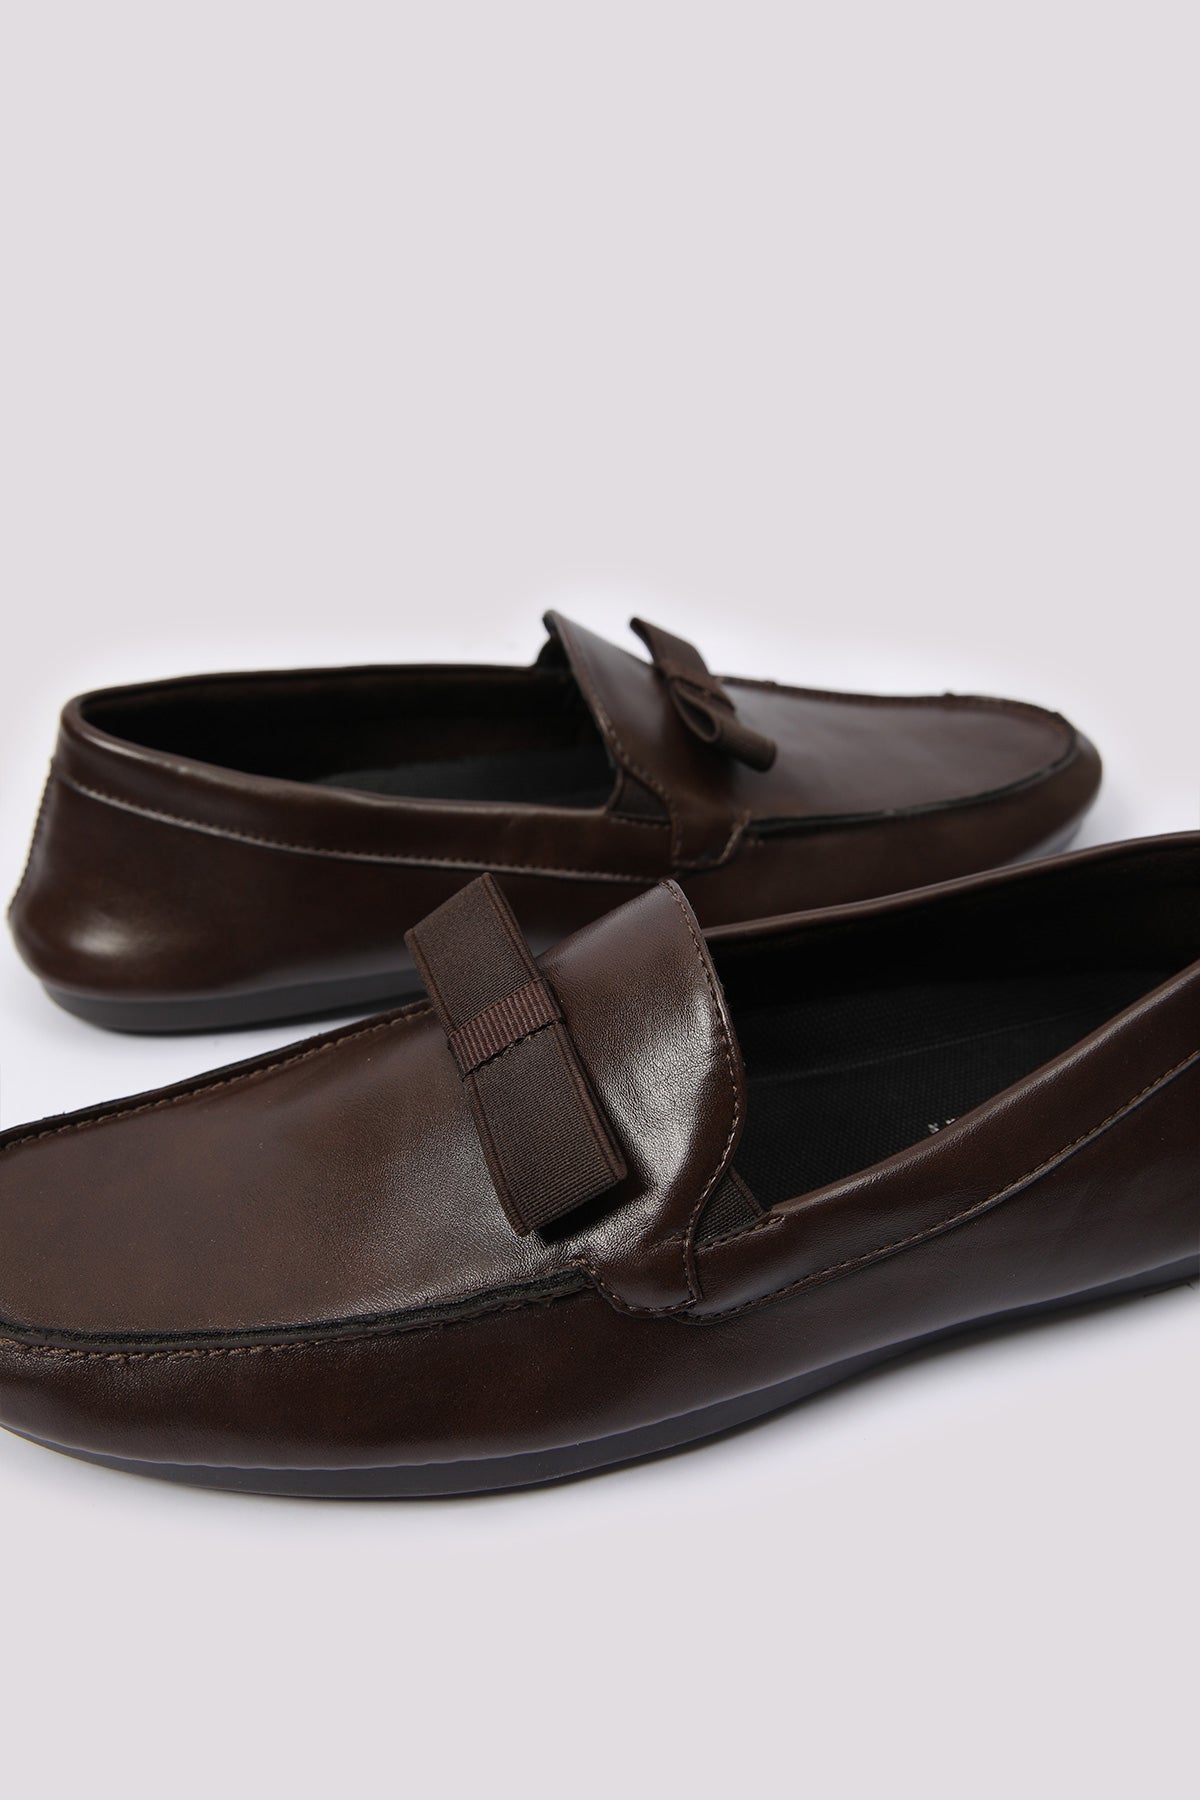 BROWN SOFT LEATHER MOCCASIN